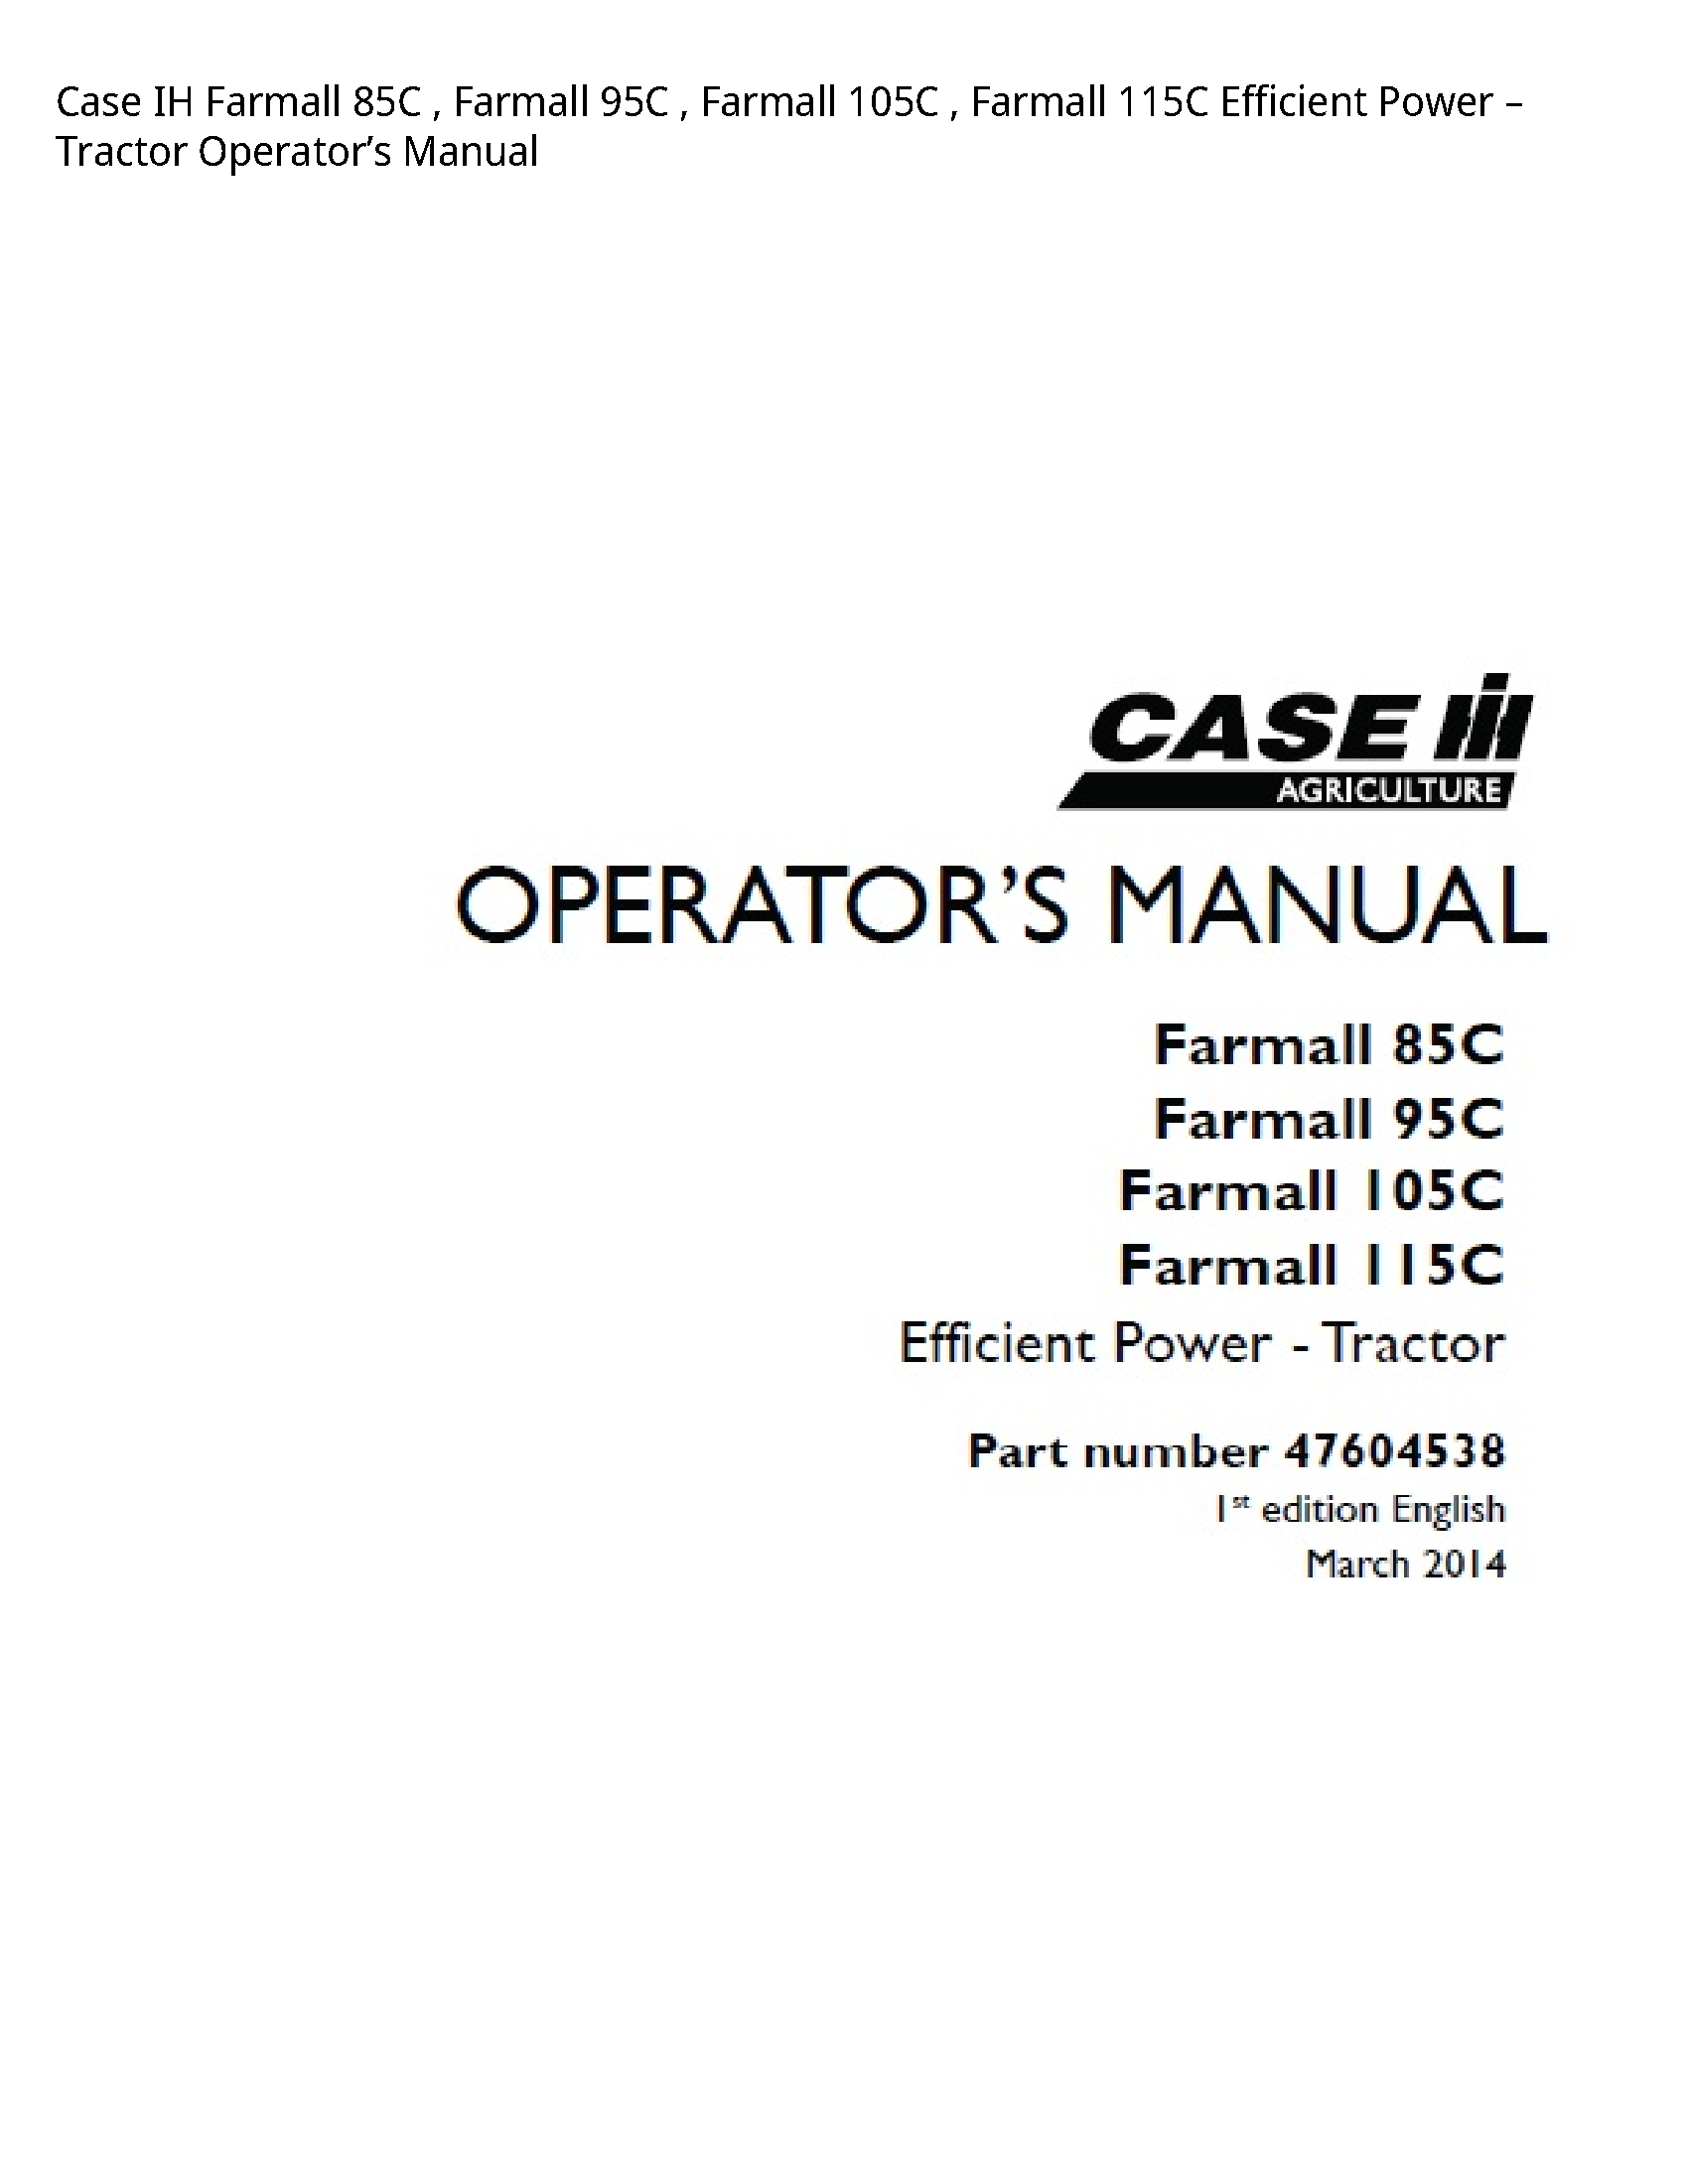 Case/Case IH 85C IH Farmall Farmall Farmall Farmall Efficient Power Tractor Operator’s manual